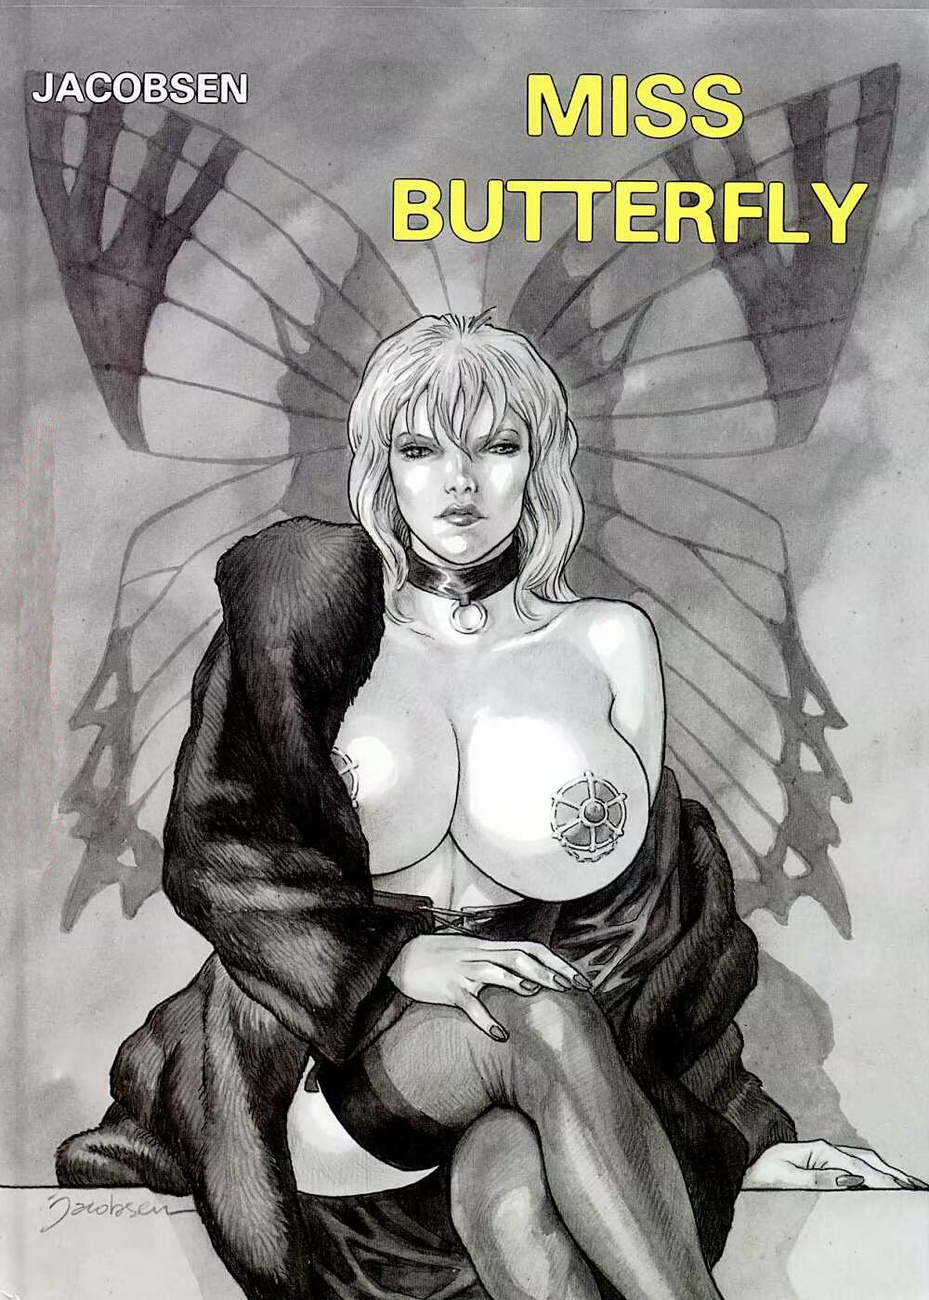 Read Miss Butterfly and browse our Futanari porn collection containing thou...